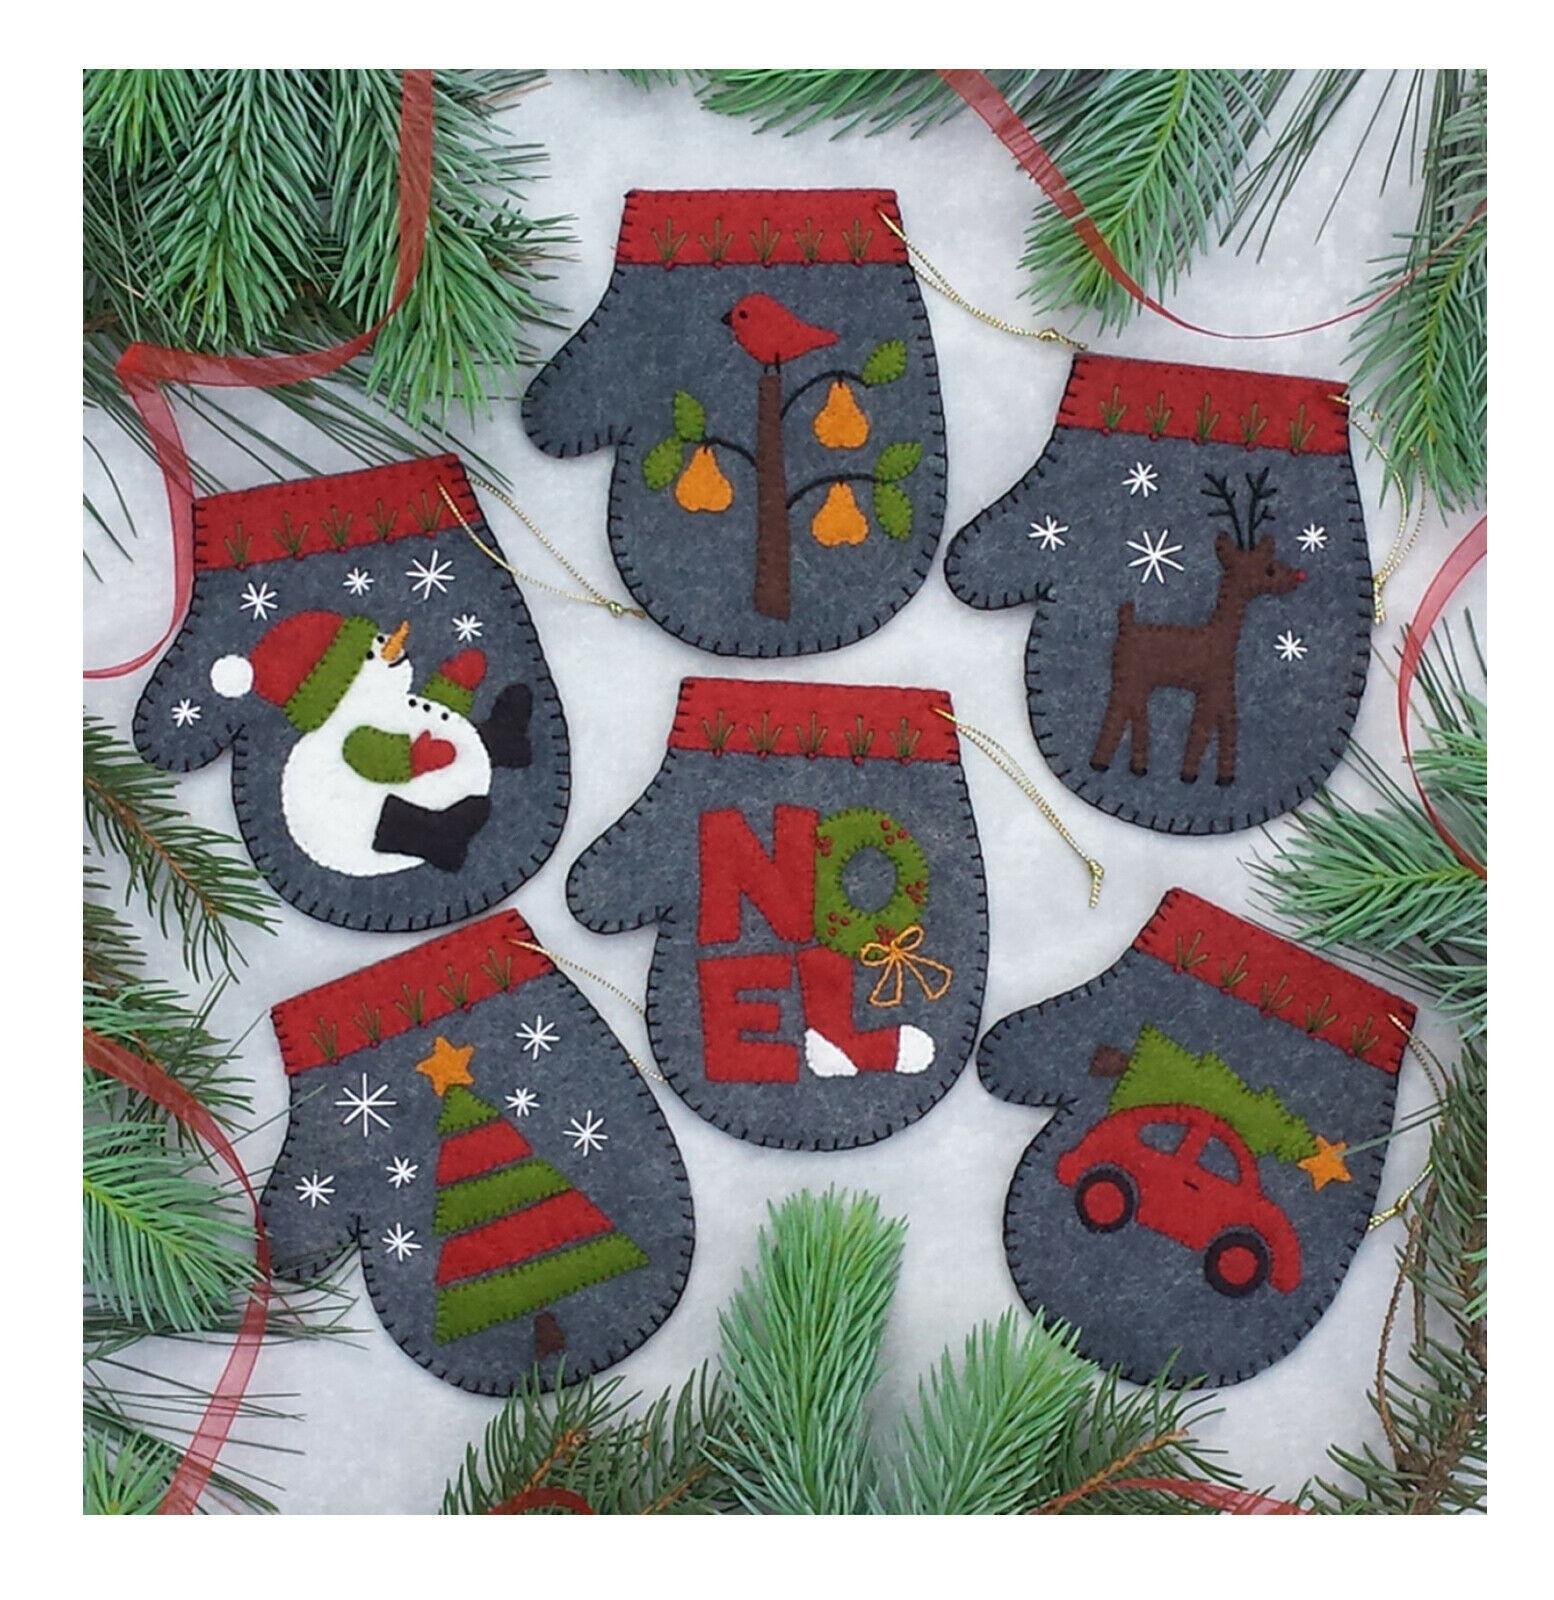 Charcoal Mittens Christmas Ornament Sewing Kit K0616 - $24.95